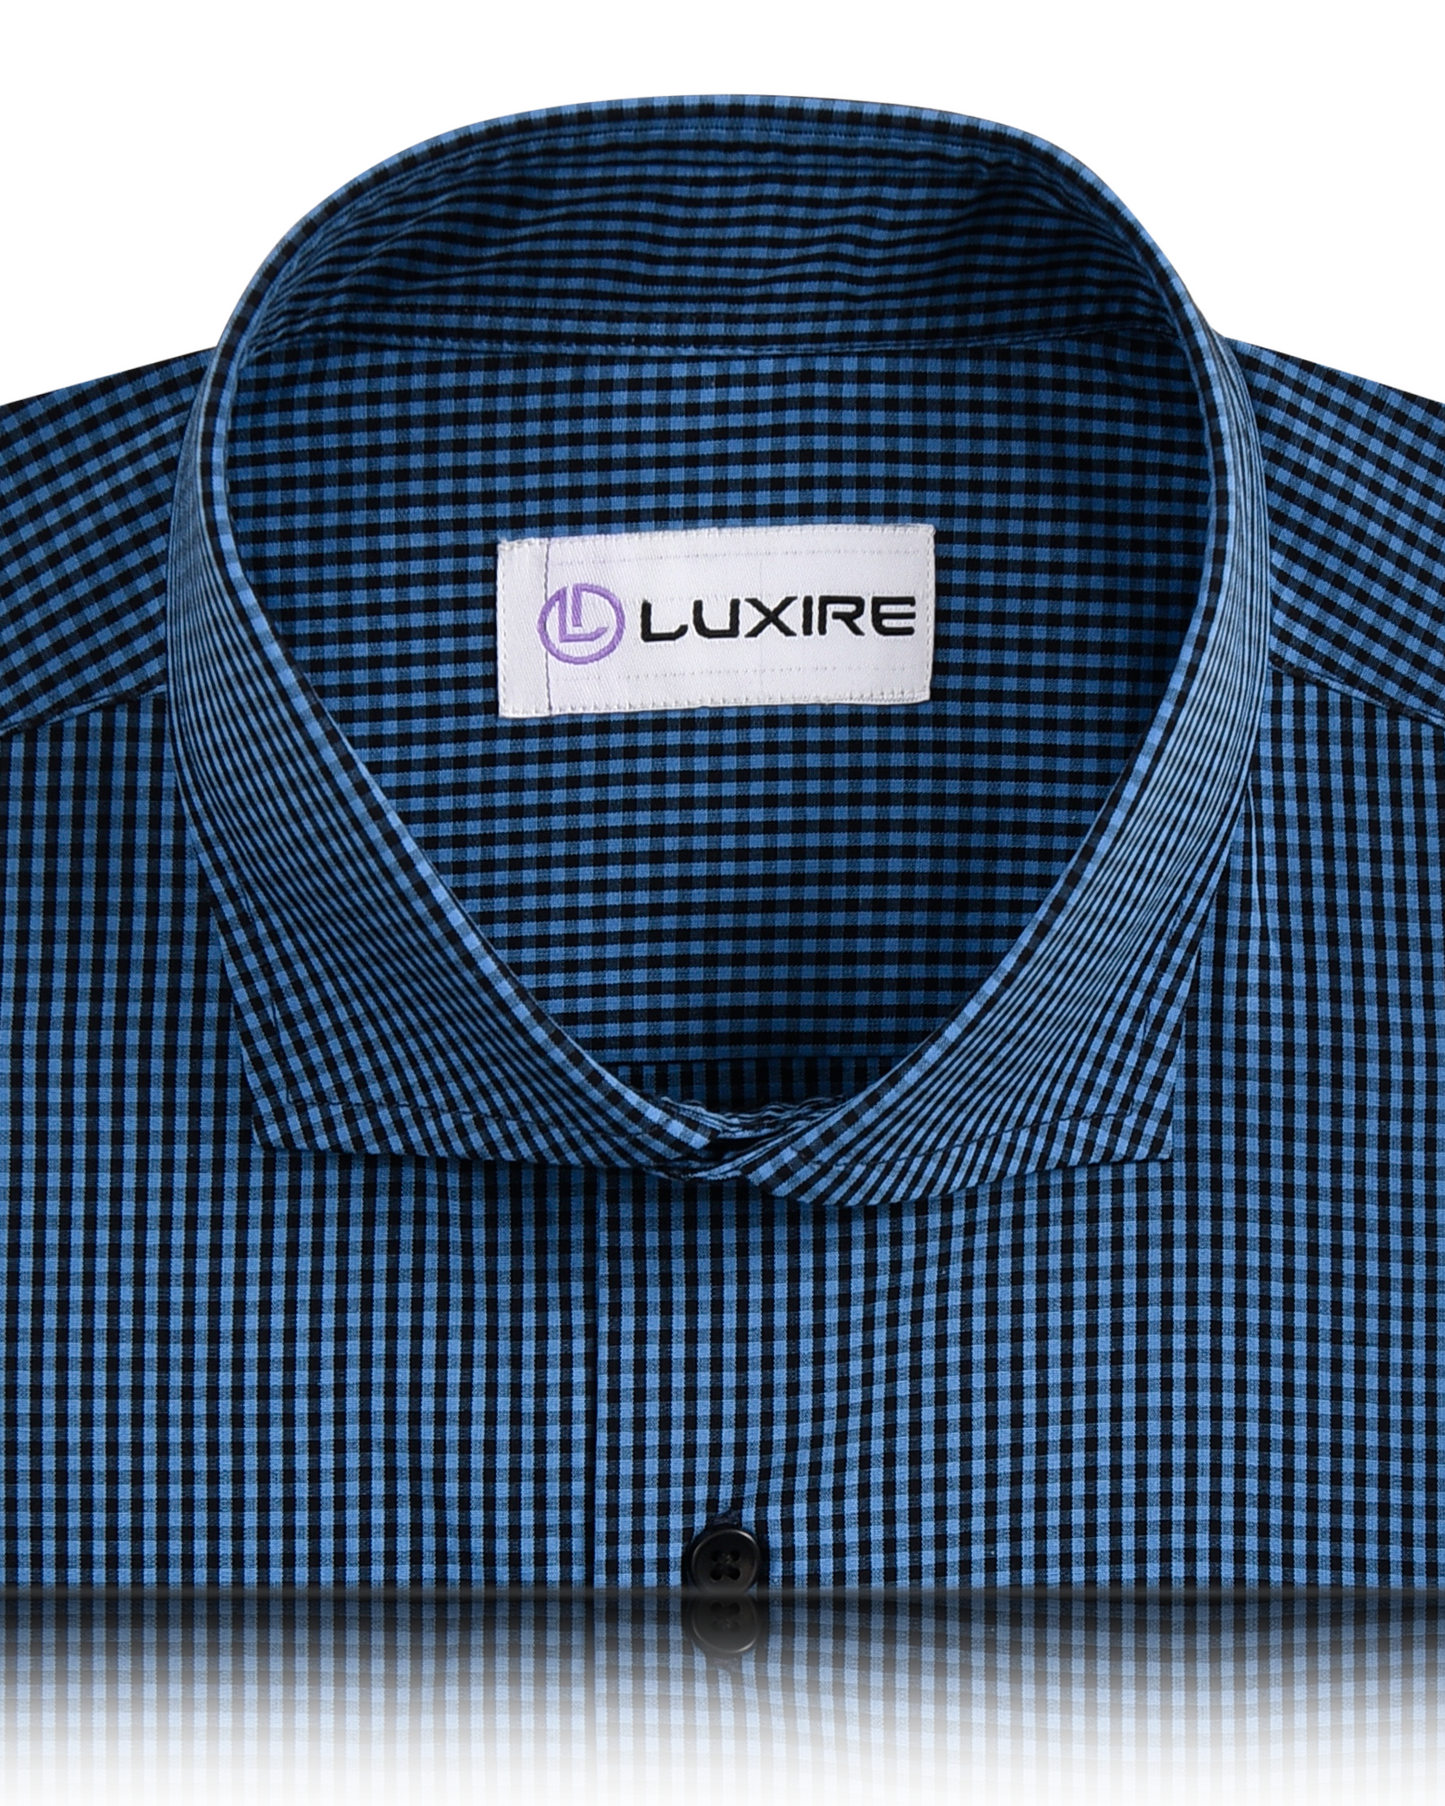 Front close view of custom check shirts for men by Luxire black and blue micro gingham